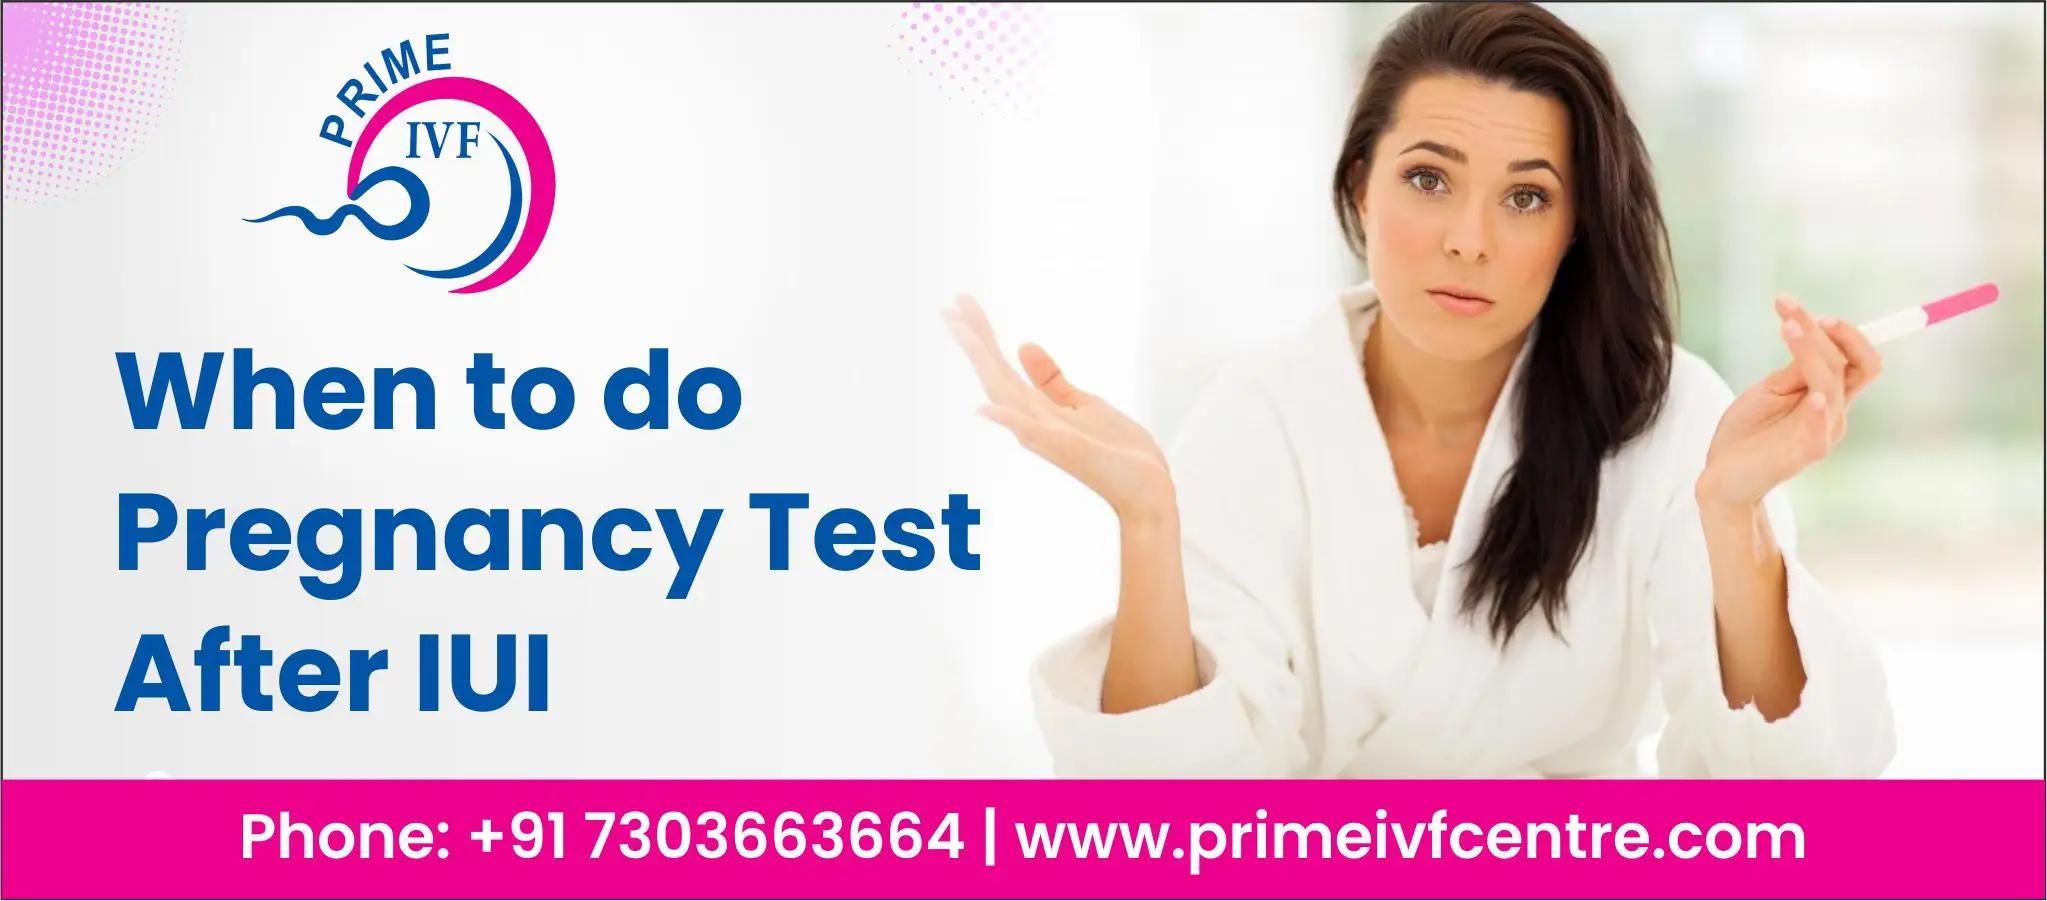 When to do Pregnancy Test After IUI